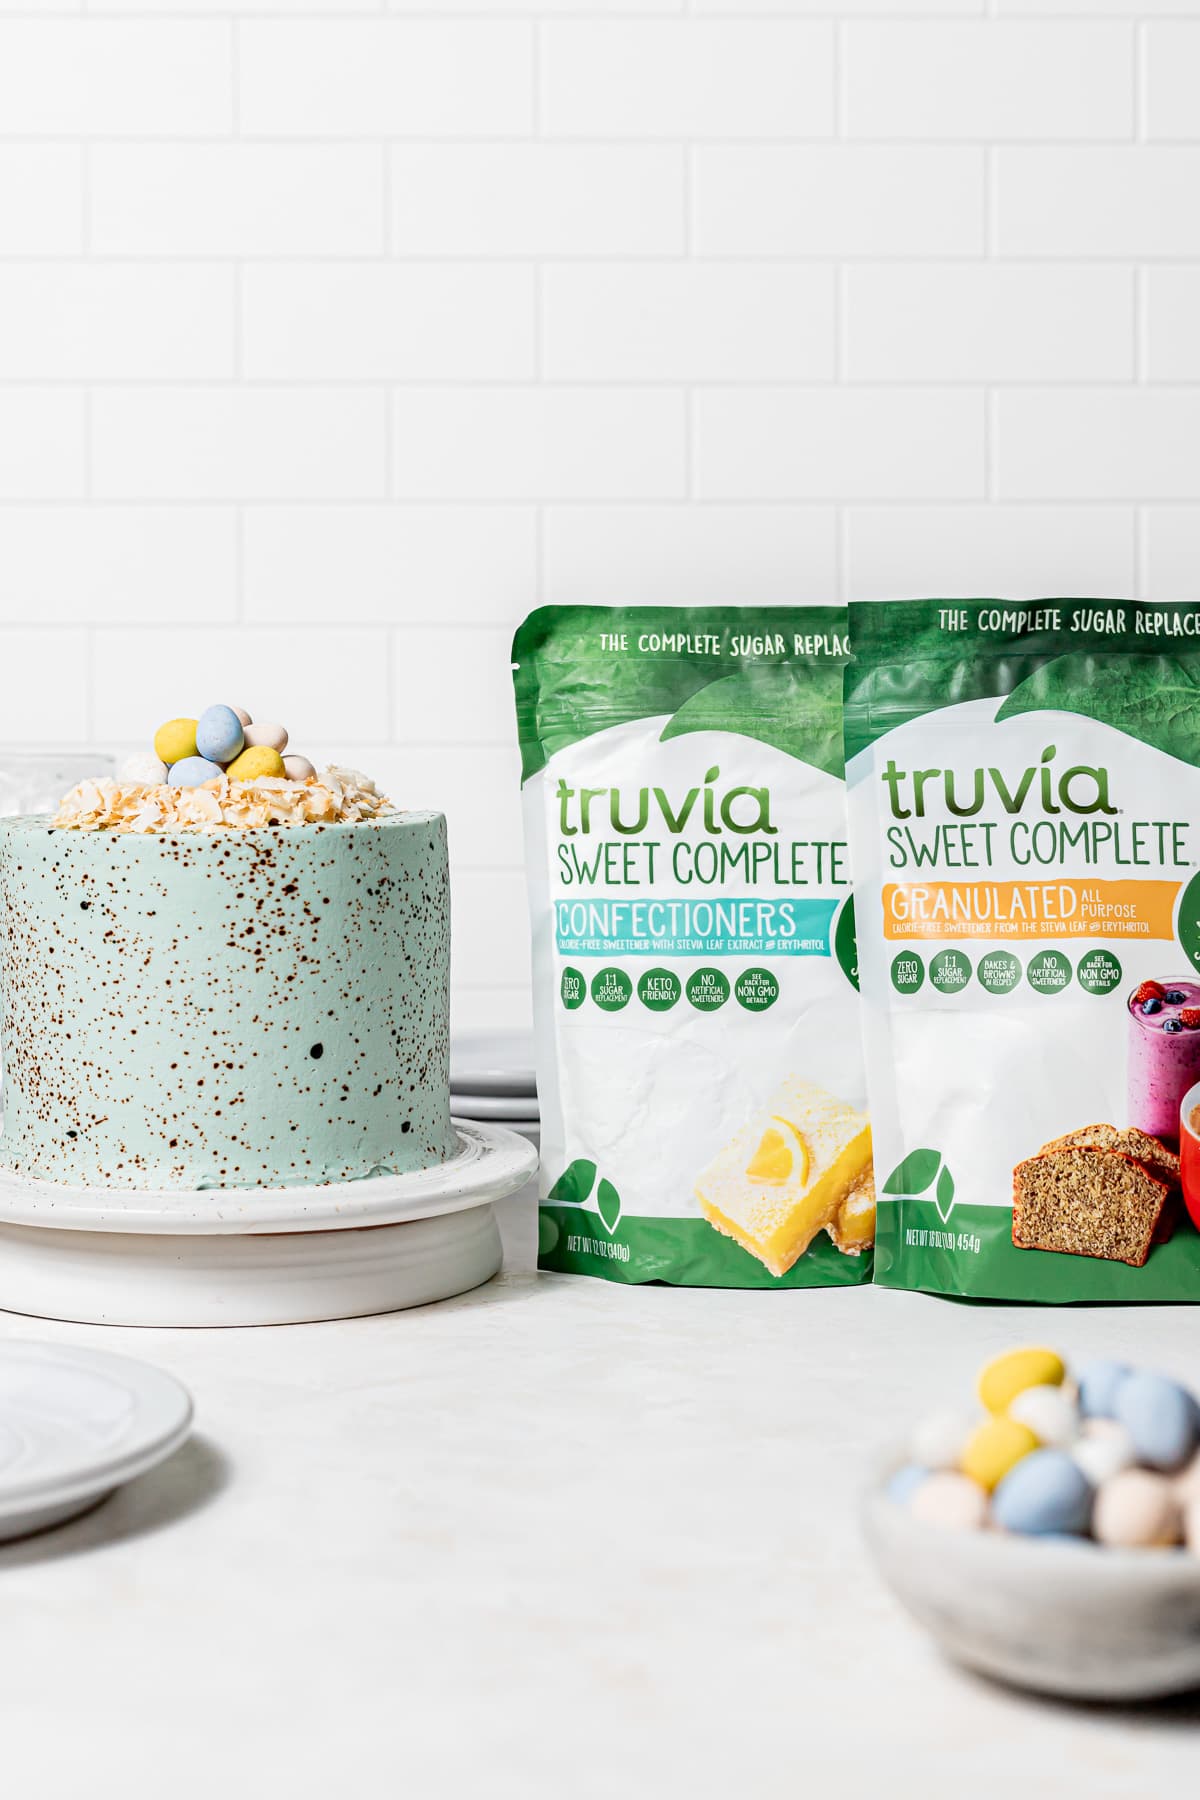 robin's egg easter cake on white cake stand with two bags of truvia sugar.